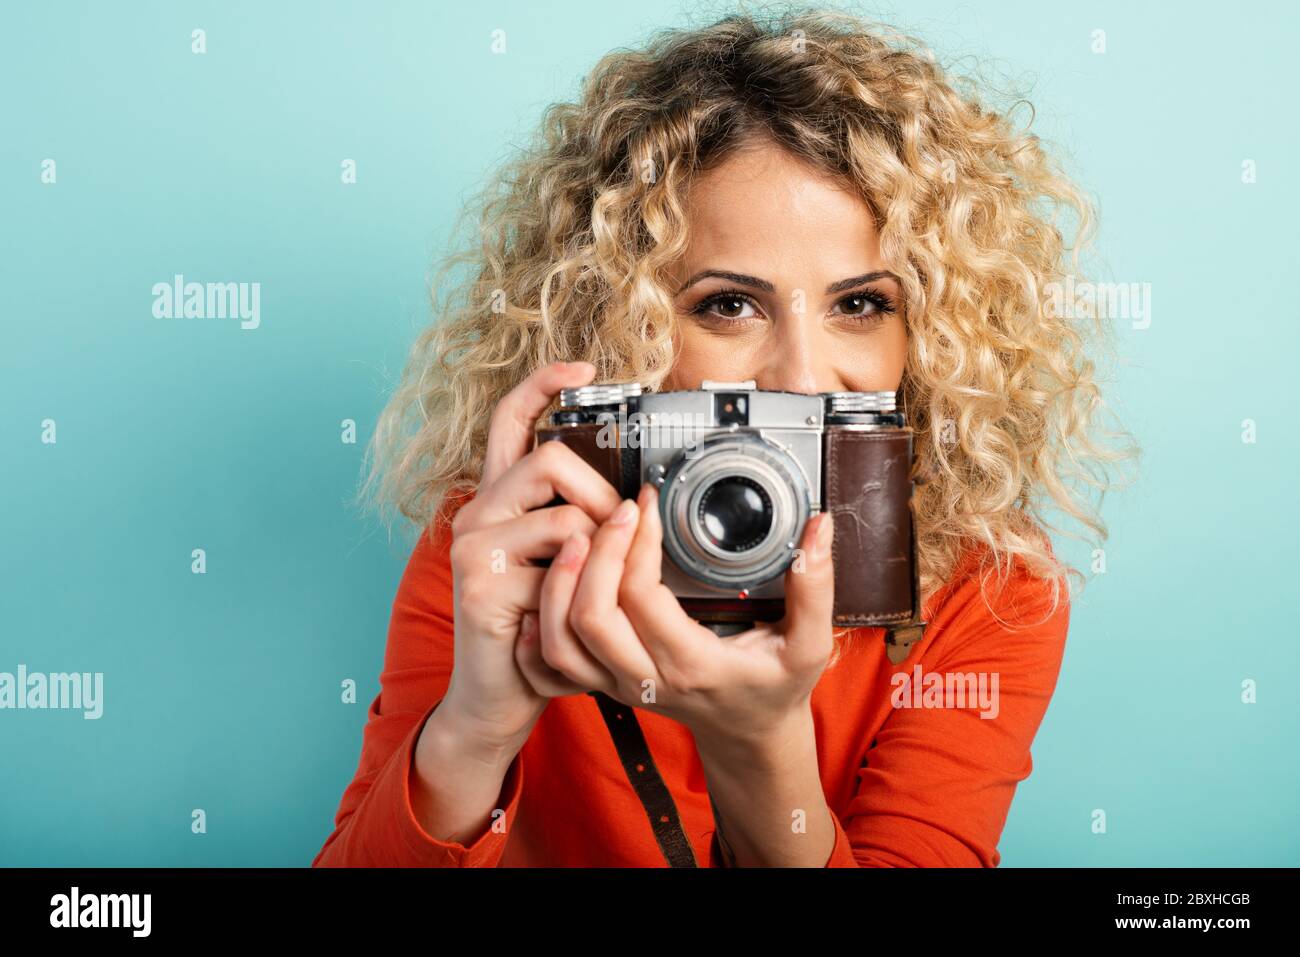 Blonde girl takes a shoot with a vintage photographic machine. Cyan background Stock Photo